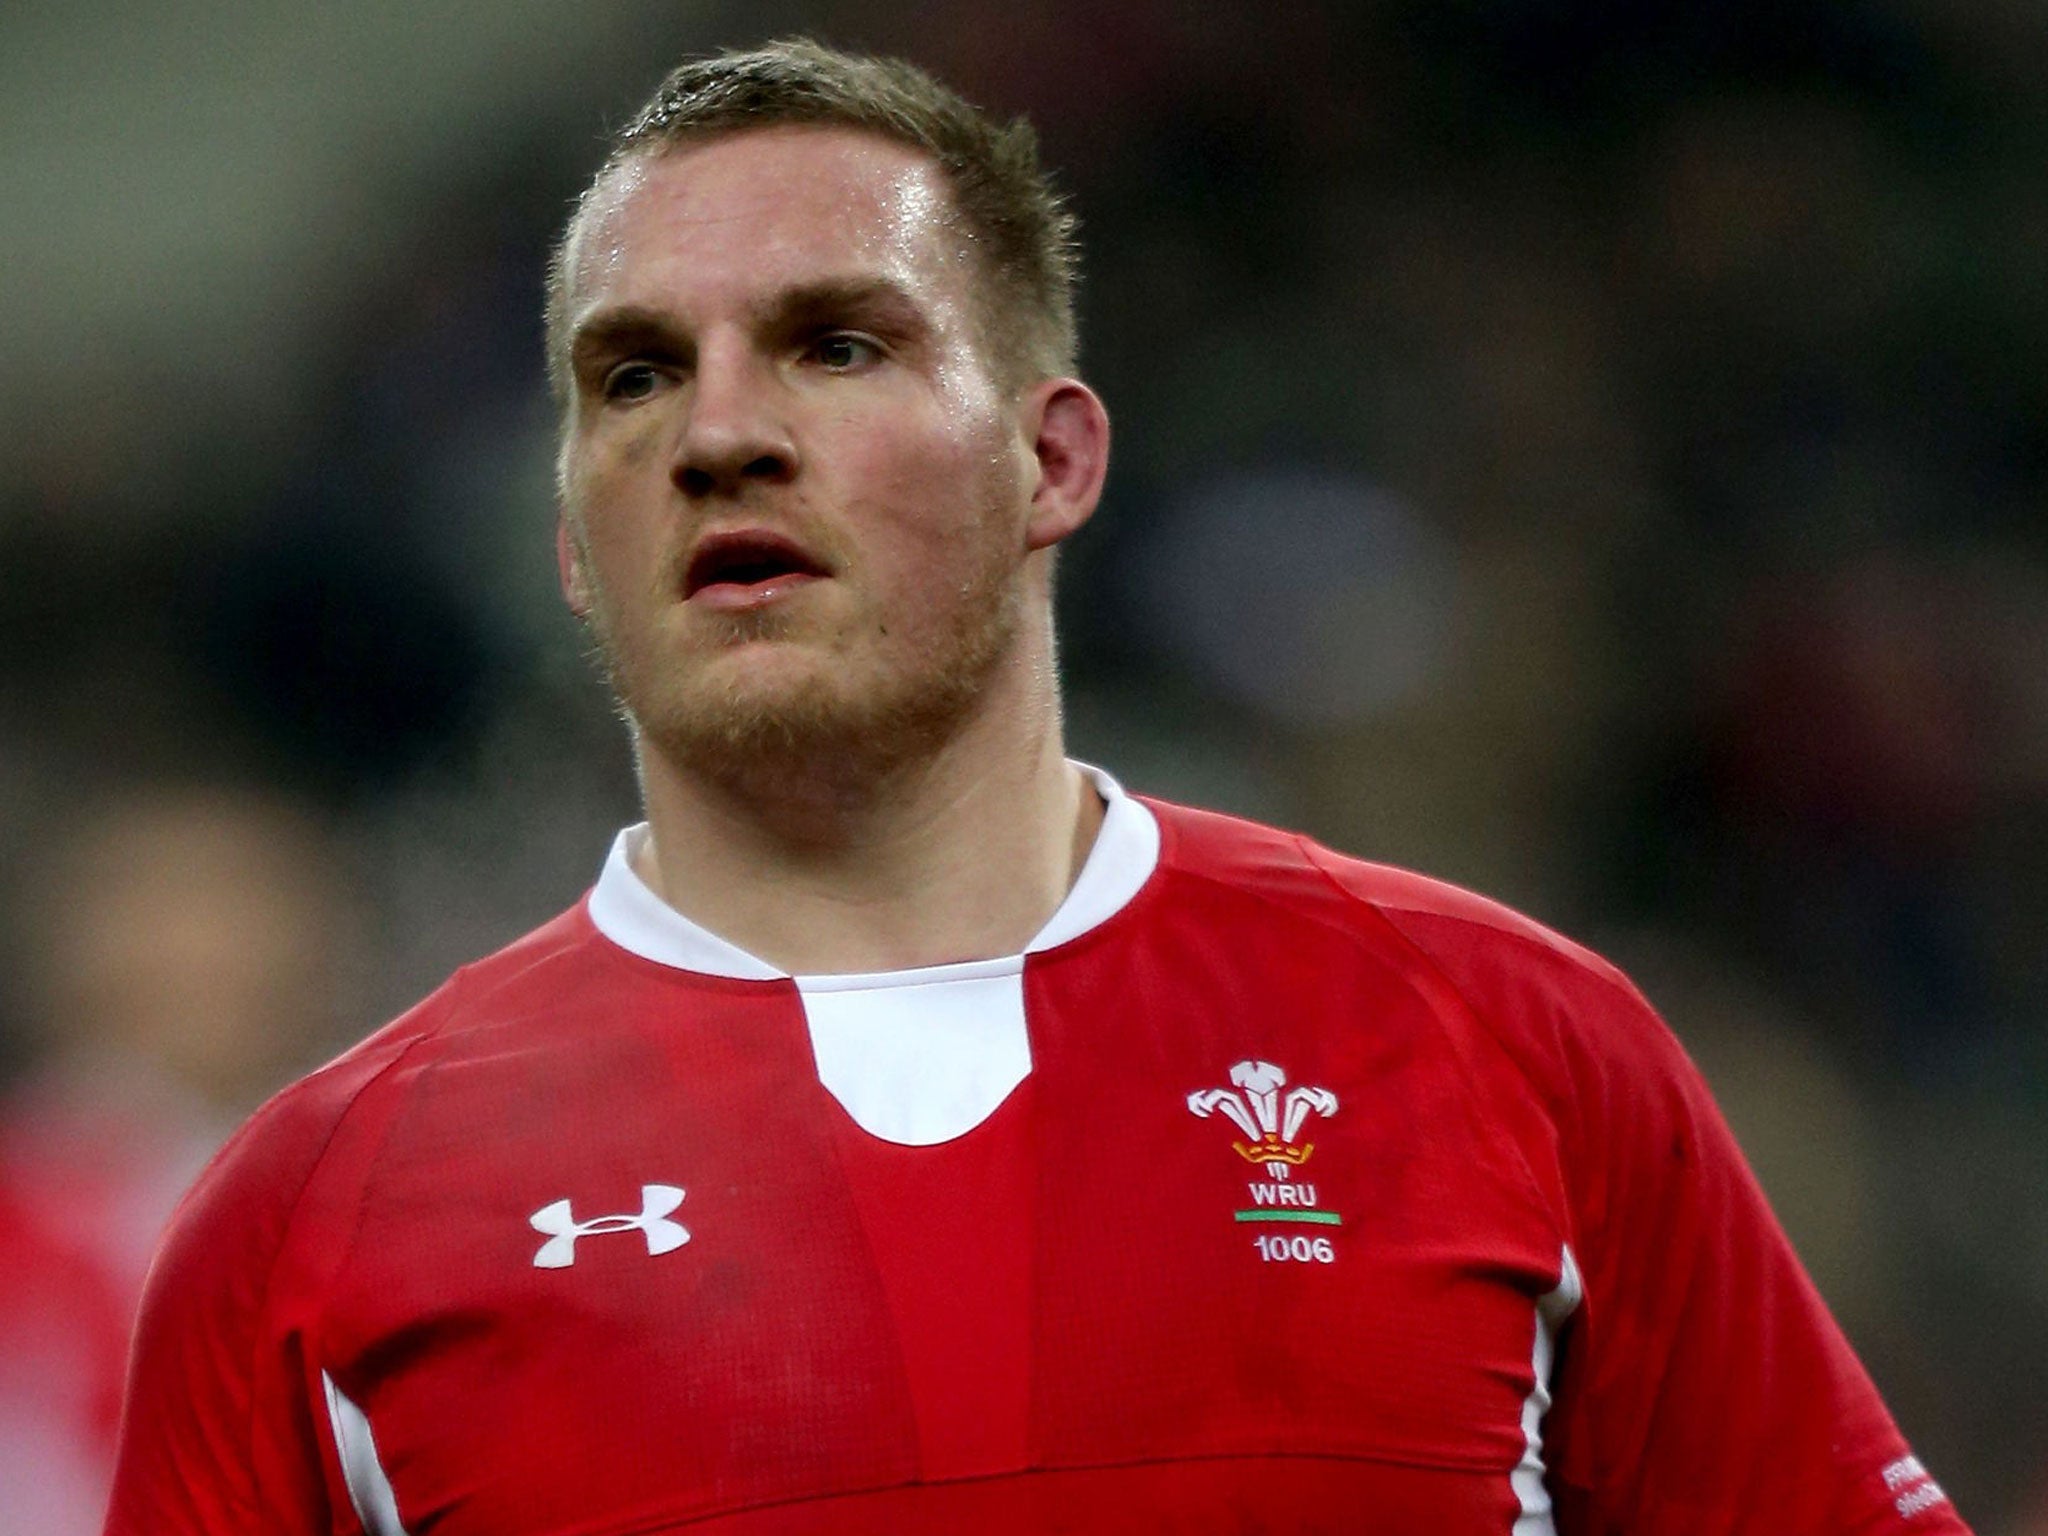 Gethin Jenkins is back to lead out Wales at the Millennium Stadium